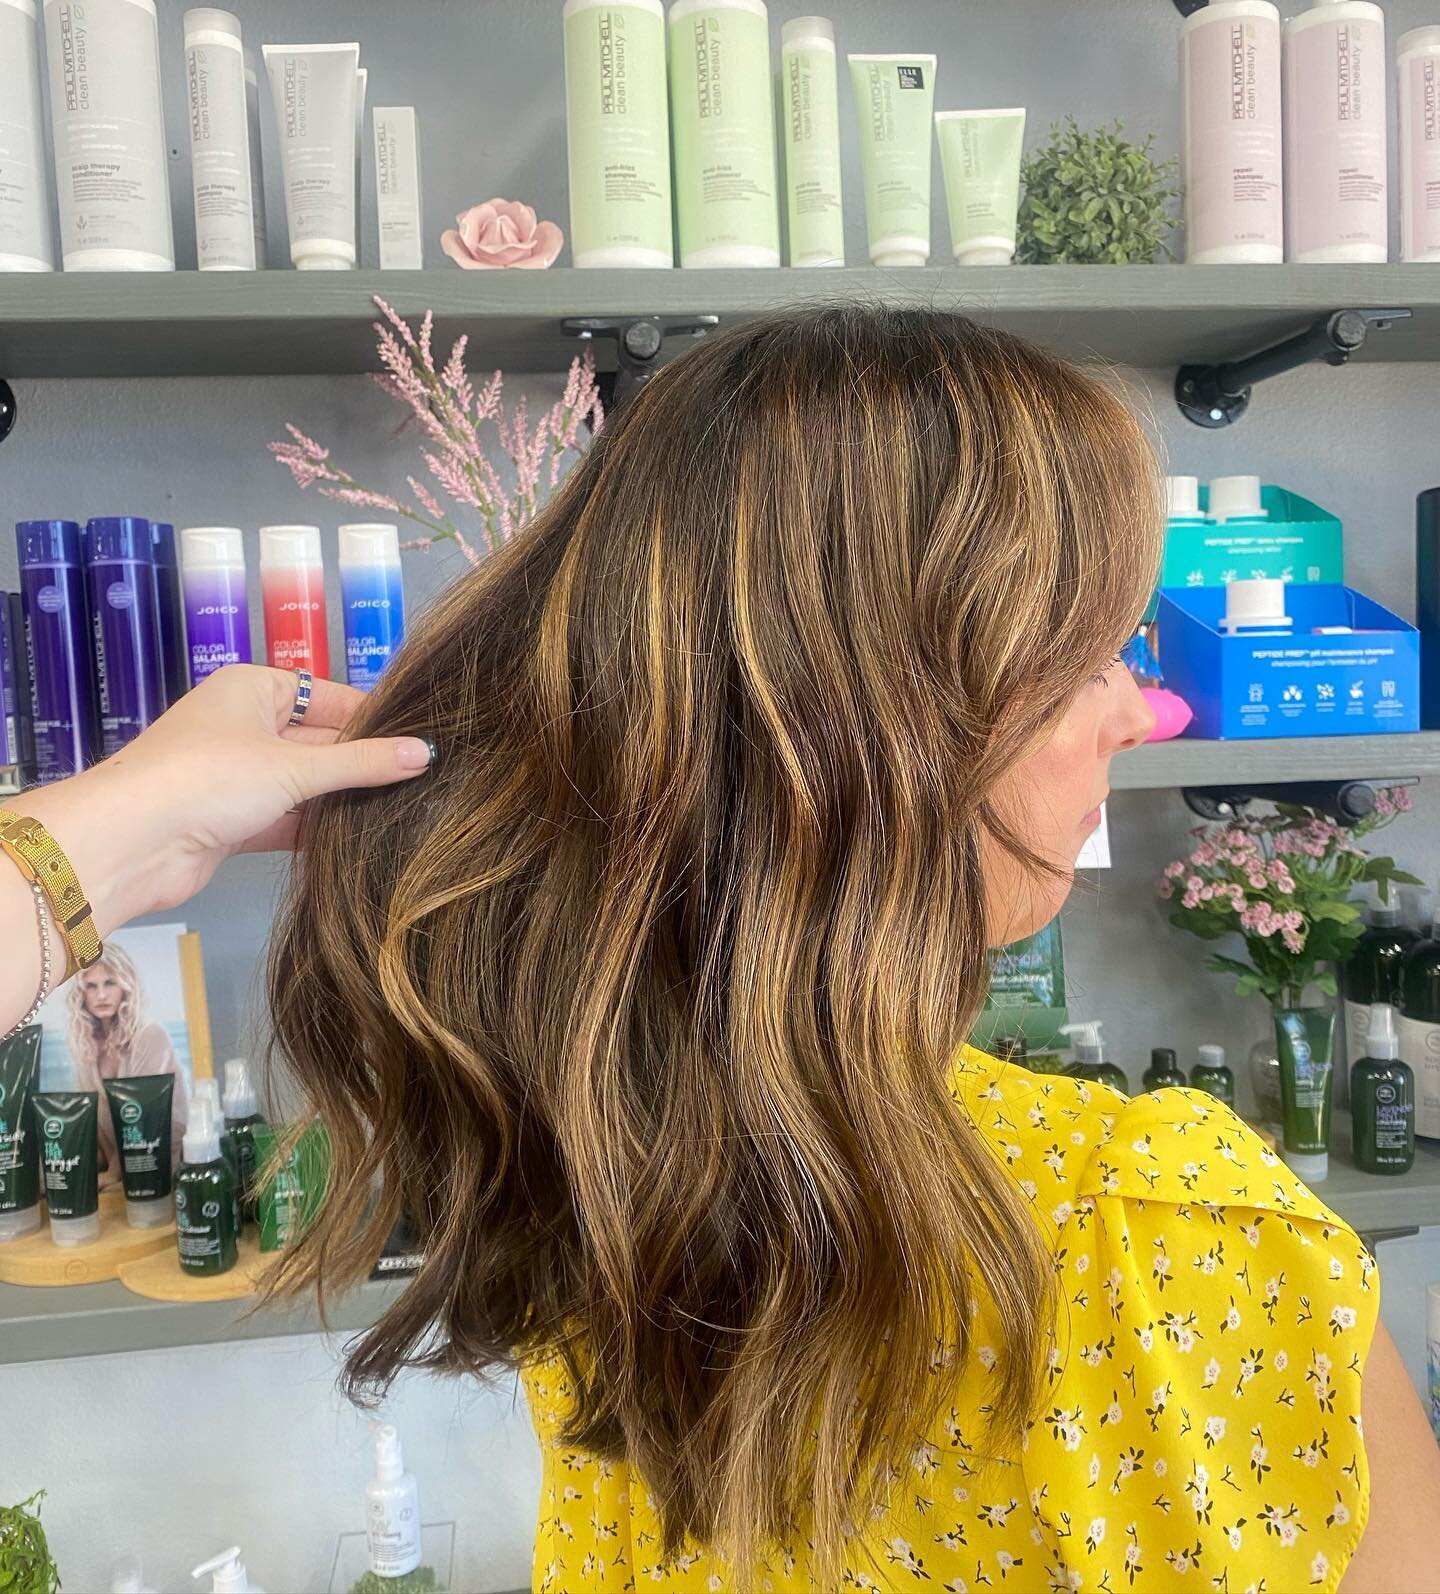 @schalansilva did highlights and lowlights to get this stunning color!! 🤩🤩

Get your hair ready for spring break and travel products for 10% off this month! 

#personaltouchsalon #sanantoniosalon #sanantoniohair #hairstylist #blondehair #paulmitche